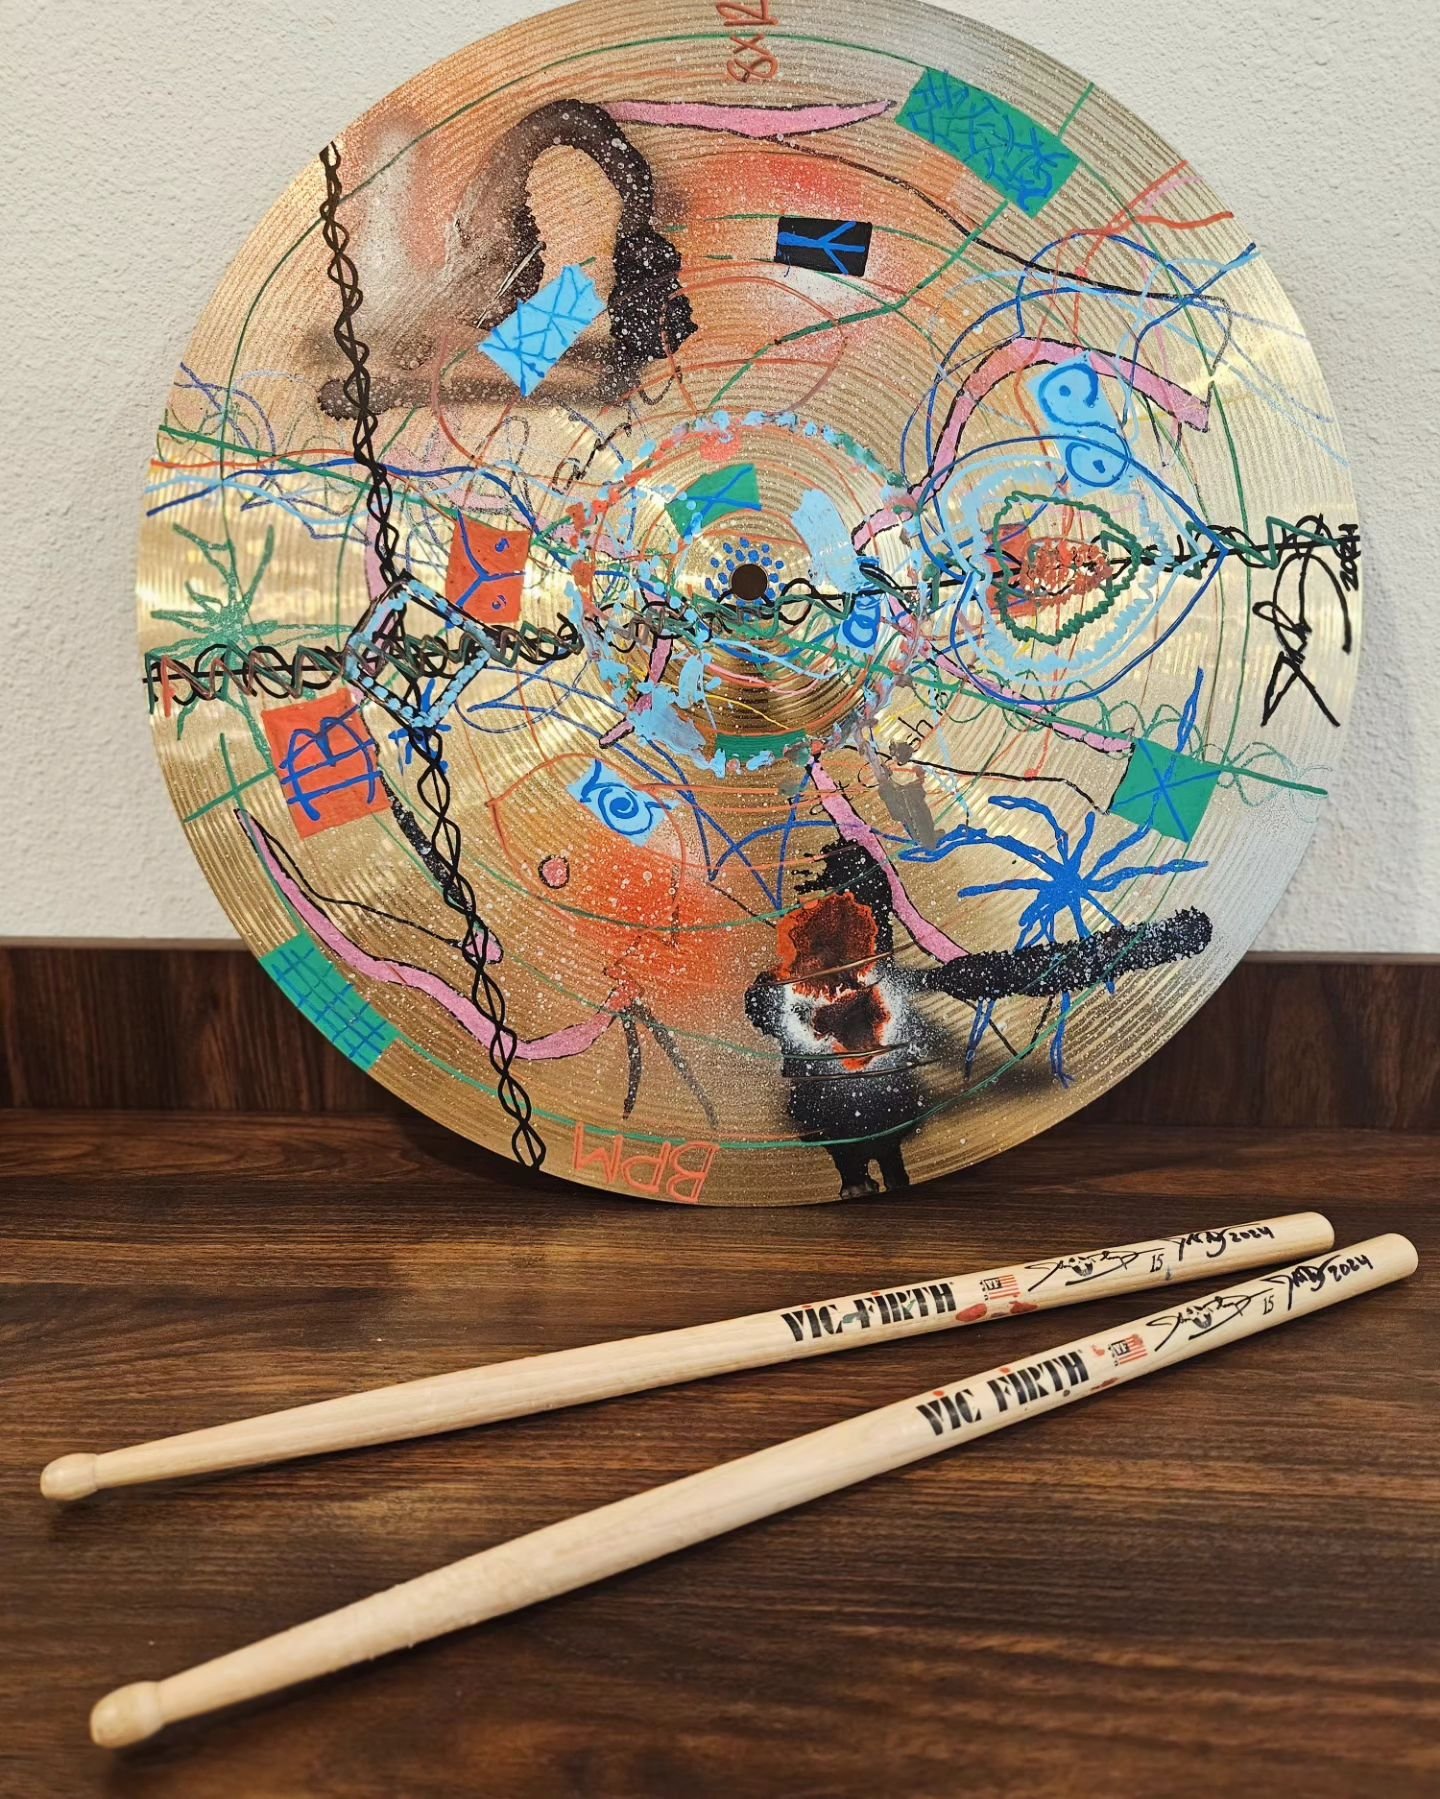 Custom painted and Symbol from @johndolmayan_ 's Personal Collection with drumsticks.
Starting bid at $2500 Silent auction closes on Sunday April 14 at 8pm DM or text (818)861-9014 with your offer